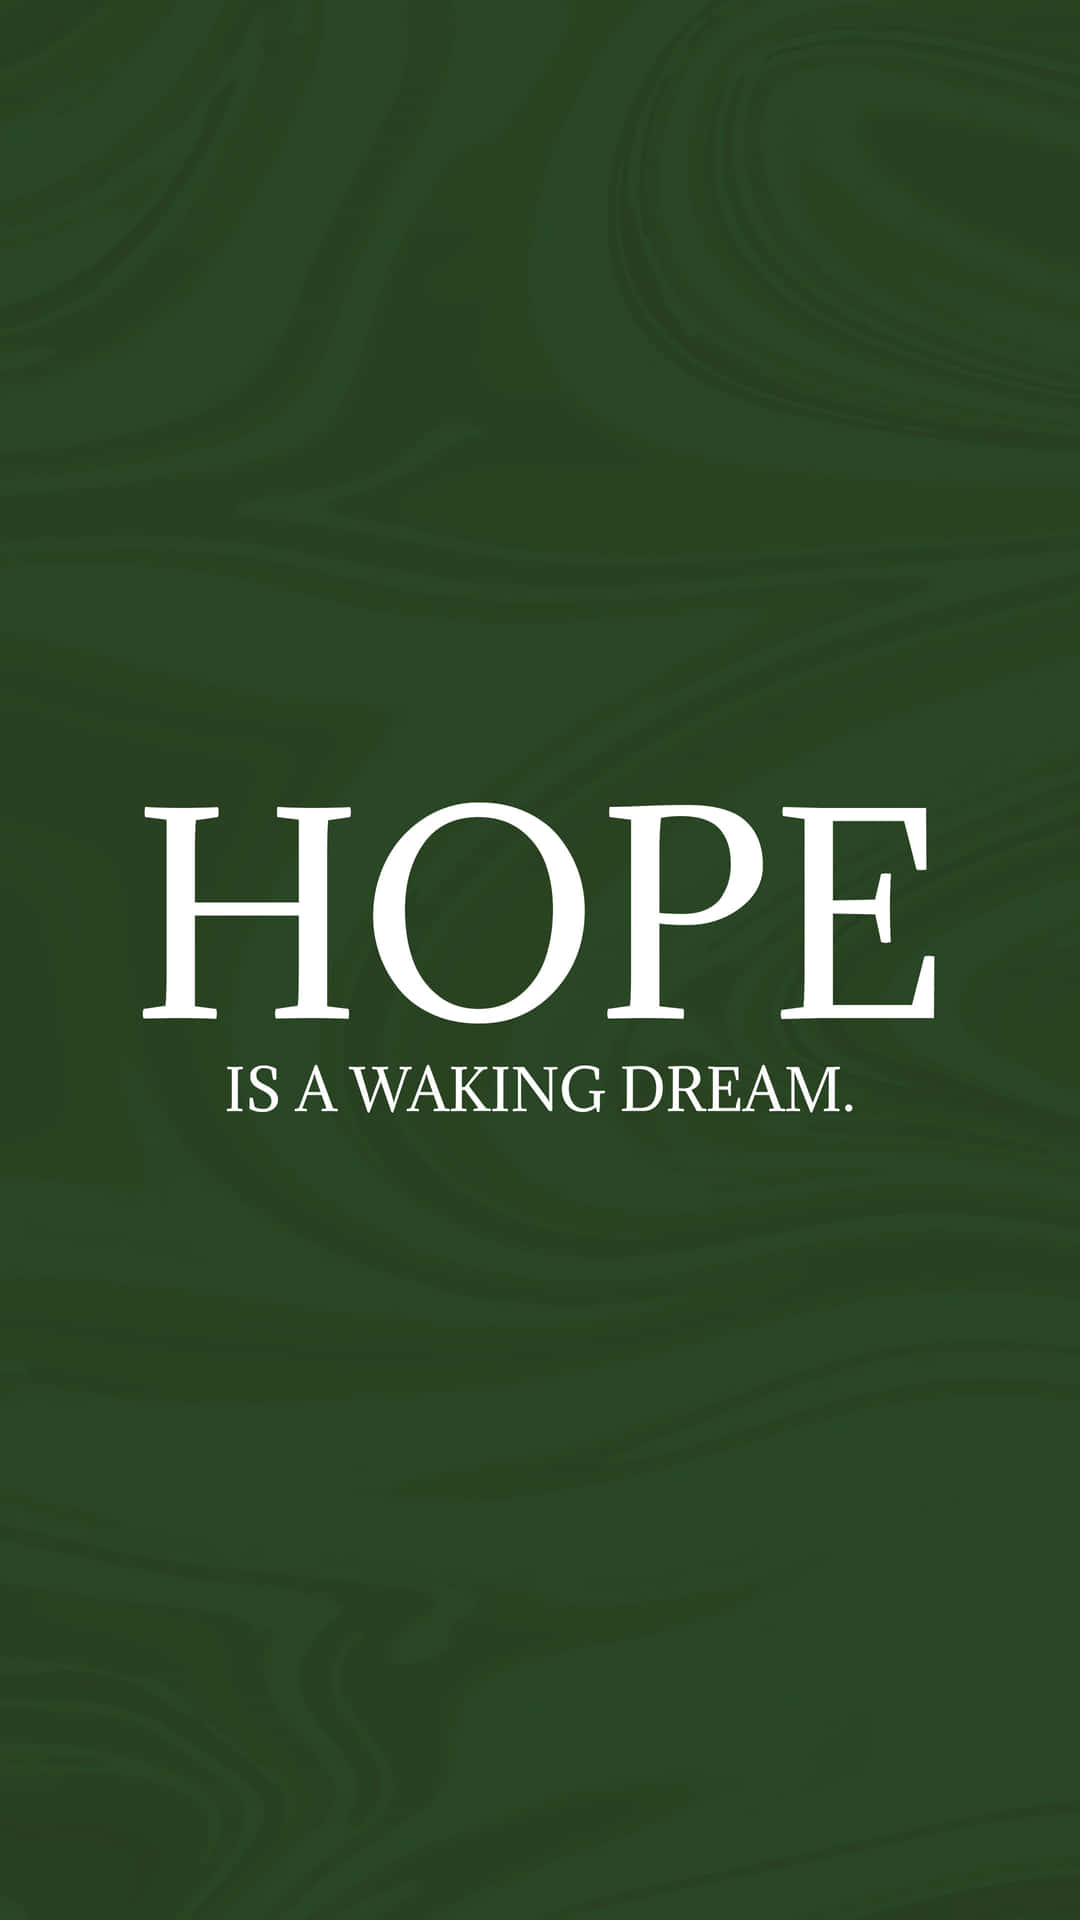 Hope Quote In Green Background